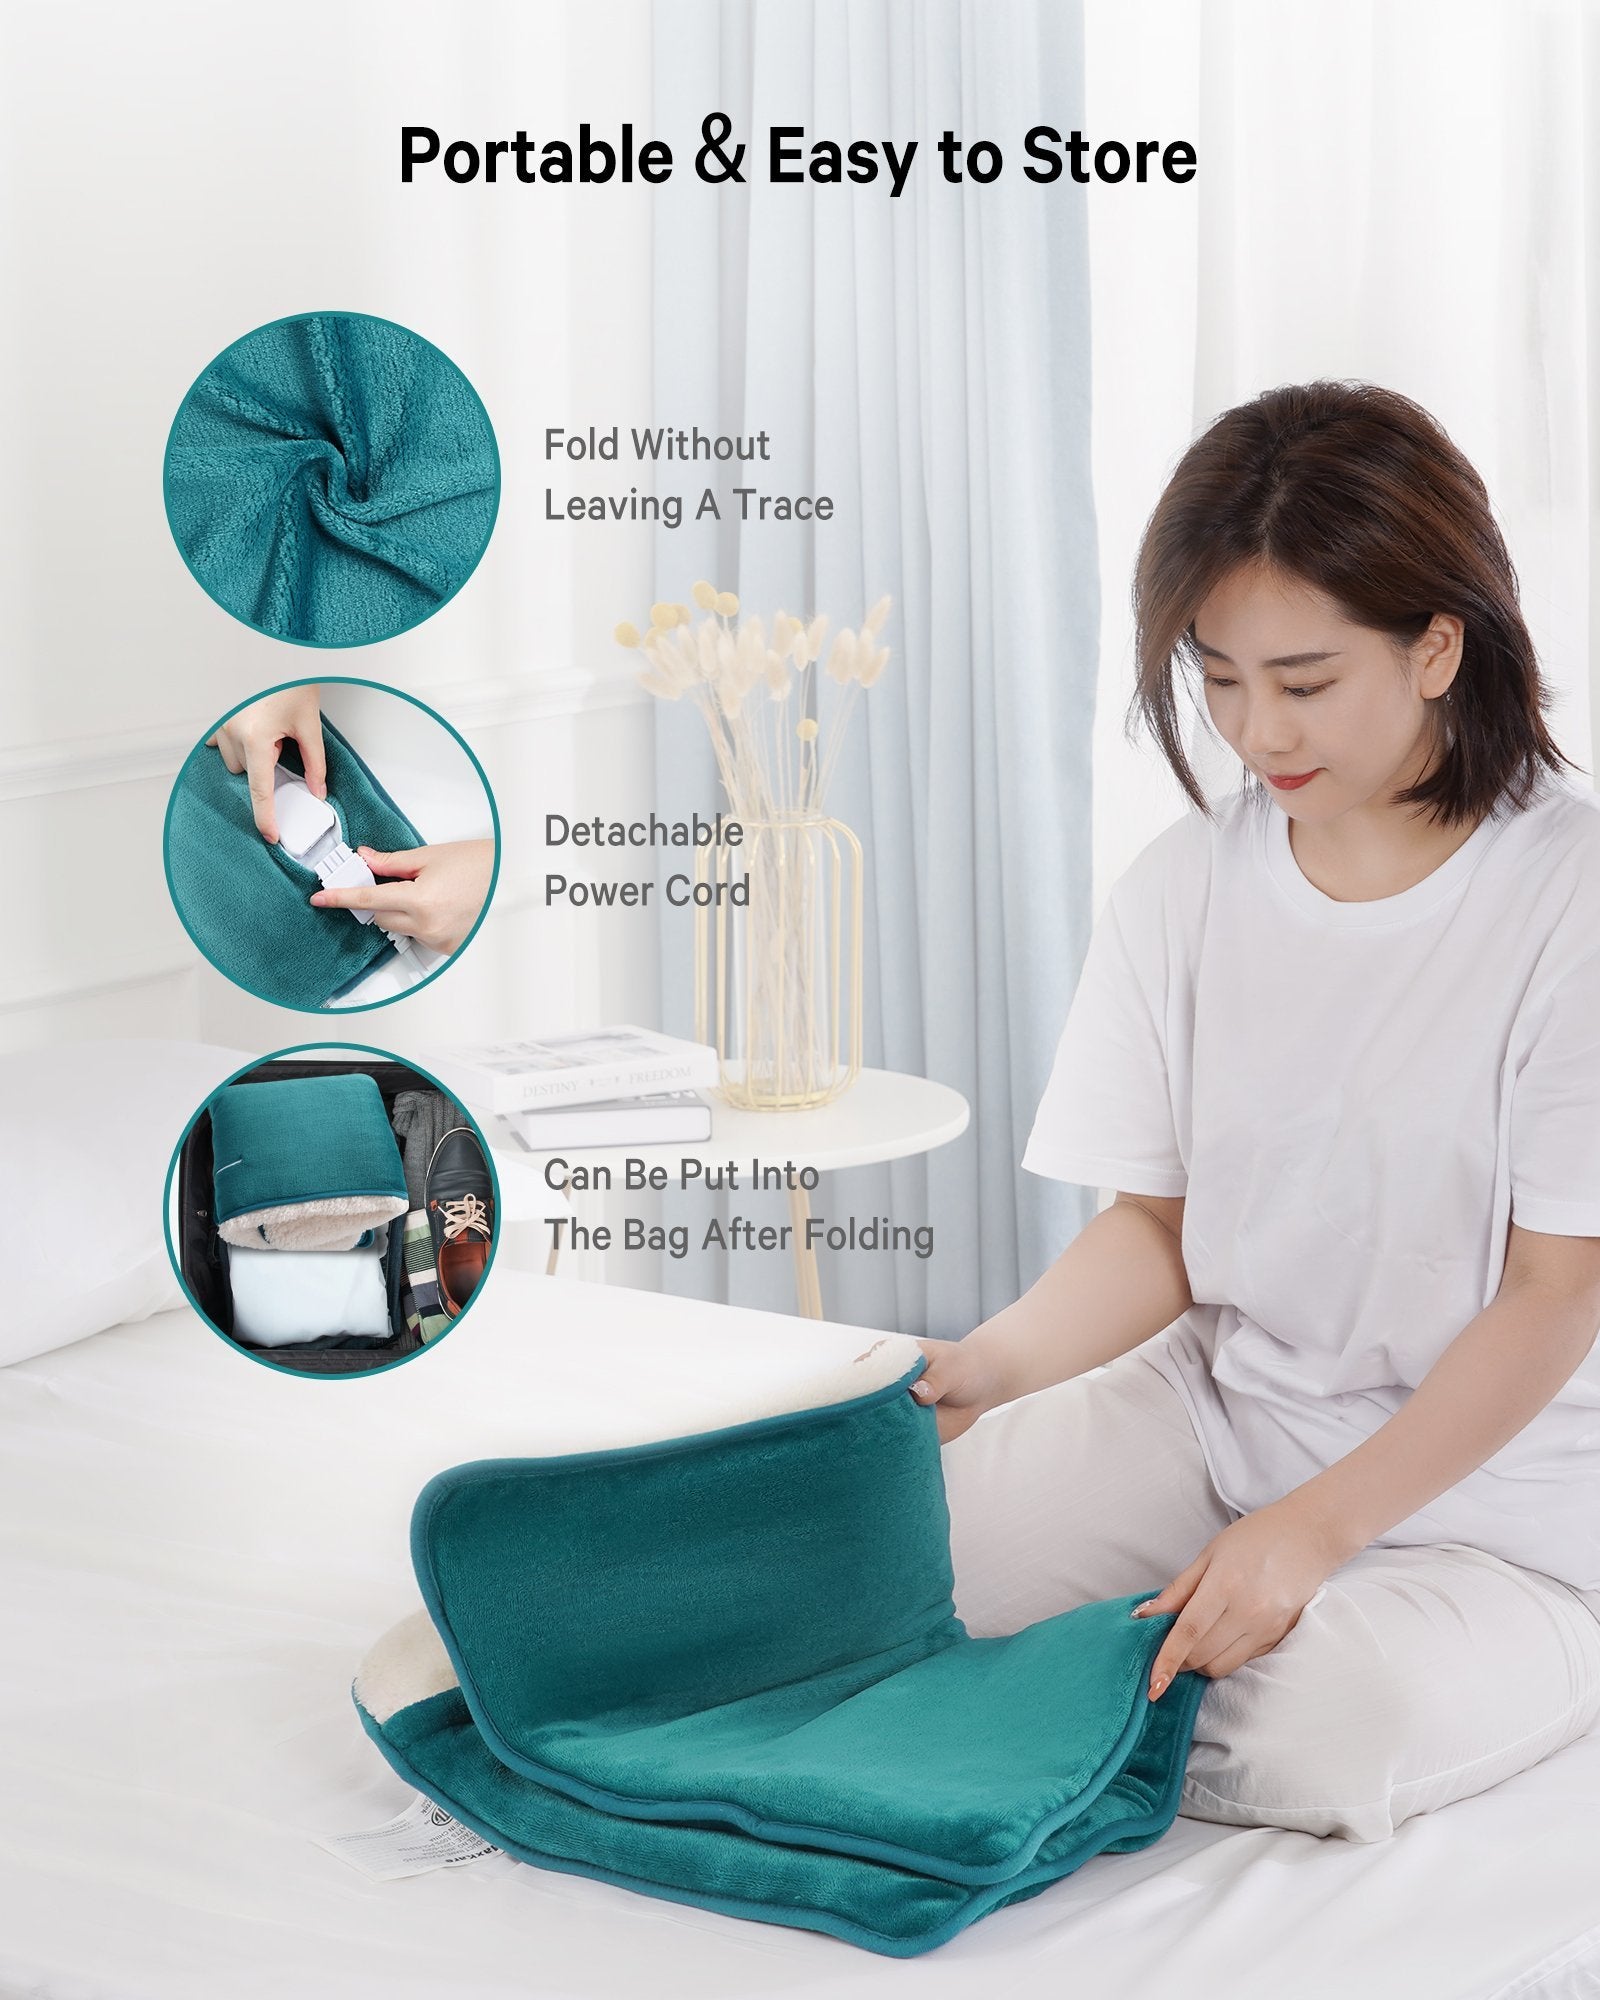 Load image into Gallery viewer, Heating Pad Electric Foot Warmer - Extra Large Size 20in x 32in Full-Body Use for Feet, Back, Shoulders with Auto Shut Off - NAIPO
